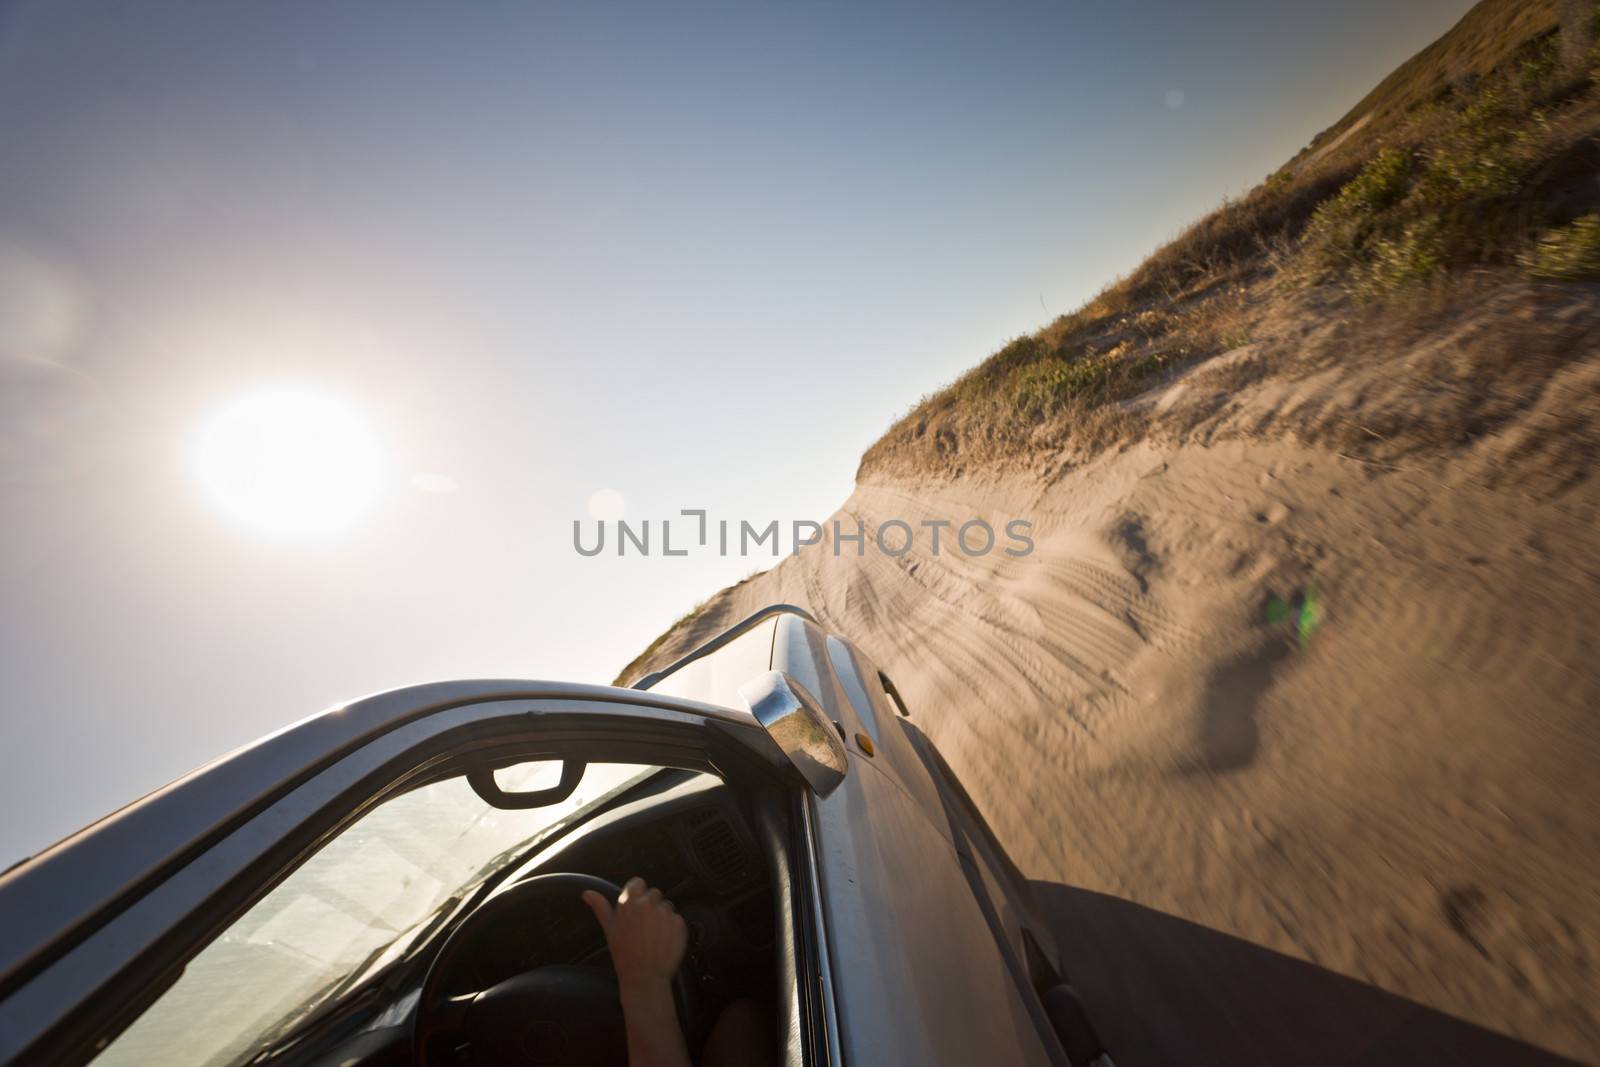 View along the side of a car driving on a dirt road under a scorching hot sun in a semi desert wilderness